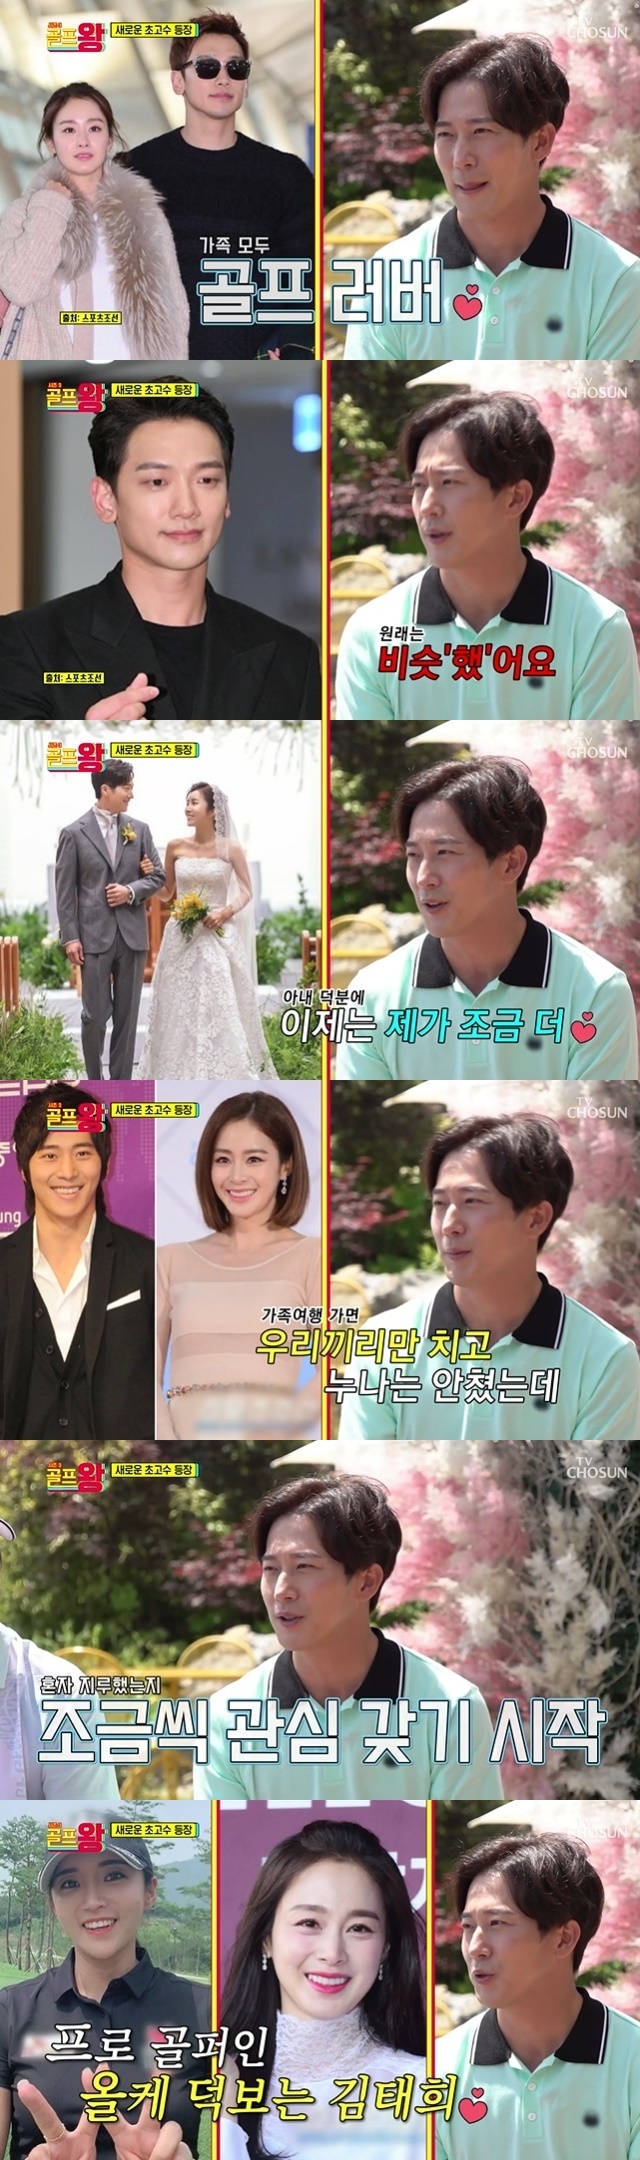 Actor Lee Wan spoke about the Golf skills and current status of family members, including sister Kim Tae-hee and brother-in-law Rain.In the 11th episode of TV Chosun entertainment Golf King 3 broadcast on June 18, King Golf continued to confront guests.Park Sun-young, who appeared as a guest with Seo Young-hee, Kyu-han Lee Wan Hong Seok-cheon on the day, said, I had rounded for more than four days when I was working hard.Yoon Tae-young, who is famous for his talent in the entertainment industry, also revealed a lot of practice at the height of his day, saying, I hit a thousand a day.However, Yoon Tae-young has shown his ability to golf after joining Golf King 3. Hong Seok-cheon laughed at the question, I am sorry, Golf is easy or easy to invest.Park Sun-young recently revealed that he has quit practicing.In the past, I went to the practice room as if I was eating rice, but I did not go to the Golf practice. However, the batting average was maintained.Yang said, Today, the Golf King team will make it back to the practice room.After the showdown began, Park Sun-young was by far the ace of the Eagle Eagle team.Jang Min-ho, who is against the green edge that he showed in the fourth shot, admired that he was I became a sister fan today.In the meantime, Hong Seok-cheon showed a sense of darkness and made a pleasant appearance for the position of King Golf.Hong Seok-cheon enjoyed a sense of happiness, saying, It is good to stand next to the members of the Golf King even when the team is losing 2-0.However, the members of the Golf King were one by one, and they were out of the side of Hong Seok-cheon and joined the Eagle Eagle team.Yoon Tae-young, who has not been able to show great performance in the past, showed a good performance on the day.Yoon Tae-young, who succeeded in on-green in two times, could not hide his smile at the cheers of the members of Golf King.Park Sun-young said, The Golf King team continues to hit Taeyoung for the second, seventh, and 80 yards.There are many mistakes there, but (Yoon Tae-young) covers them all, so the score is good. Yoon Tae-youngs Golf skills were highly improved.Yoon Tae-young revealed the 4 jinx. If he hates 4 and has a ball 4, he collects it and gives it to others.Yoon Tae-young deliberately gave the Eagle Eagle team three balls of misfortune that day.With Hong Seok-cheon grumbling at the ball that did not set the head, Kyu-han Lee laughed and laughed, Is not that rich?On the other hand, the Golf King team won 5-1 on the day as if they had received the energy of 4 balls.After that, the Golf Wang team went to Seosan, Chungnam and met the next opponents Kang Seok-Woo, Yoon Yoo Sun, Lee Wan and Choi Dae Chul.At this time, Yoon Tae-young asked Lee Wan, his wife professional golfer Lee Bo-mee, who married in 2018, Do you play rounds frequently?Lee Wan replied, When the wipe goes to practice, go to the practice room, and when I round, I drive to the Golf field.Kim said that Lee Wan can not help but play well, and that his family, Rain and Kim Tae-hee, all enjoy Golf.In the meantime, I asked how much Rains ability was compared to my own ability, and Lee Wan, 72, said, It was originally similar to me.(I) got a little better after meeting my wife, he replied, revealing the aspect of a lover who secretly boasts his wife.Sister has just hit Golf. We go on a family trip and we do not hit Sister, so I was at the resort or saw my nephews.I have to hit it, my wife taught me the sister and gave me a gift. Give me a fun in Golf.Kang Seok-Woo, who appeared as a guest on the day, mentioned the controversy over the blindness crisis caused by the side effects of the Corona 19 vaccine, which recently collected topics.I was going to hit Golf, but it was black when I saw the green side, he said. After about a month and a half, I recovered my original vision.I went up to par 4, but it was a par 3, he boasted that he was a tough player.